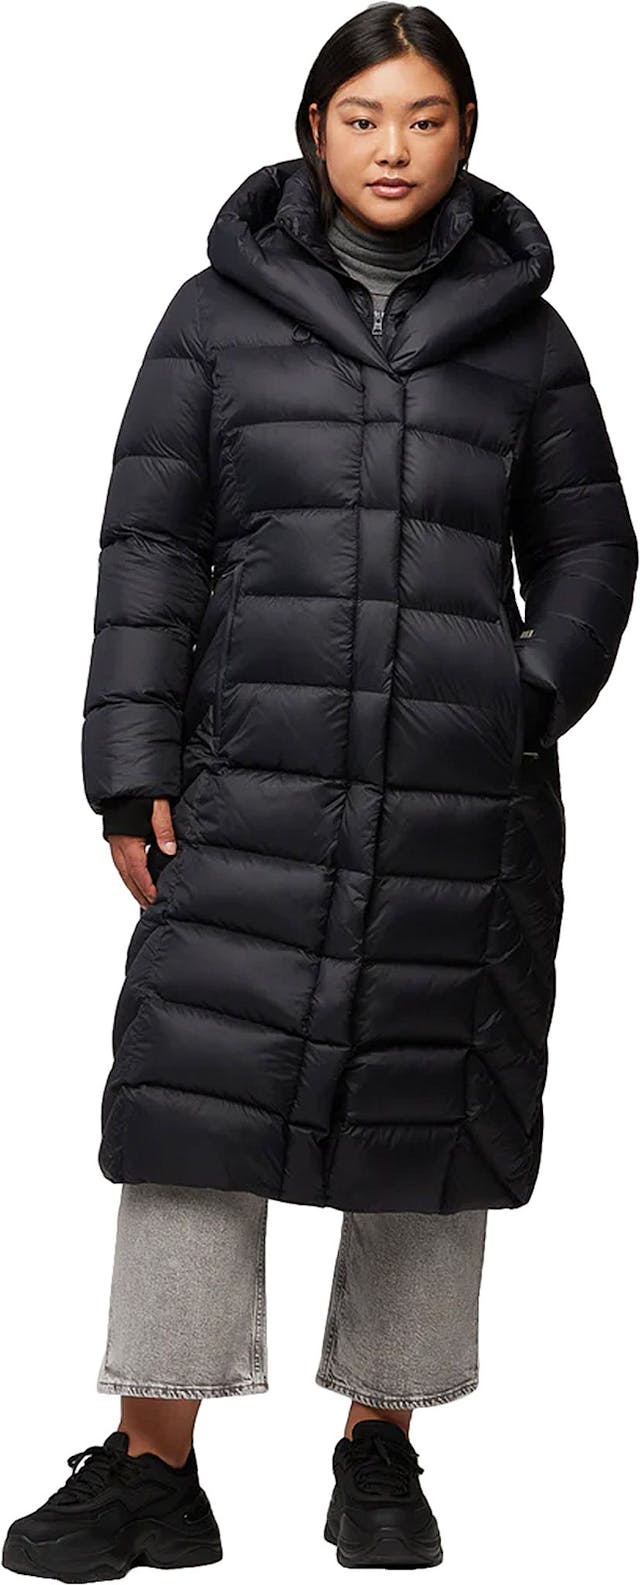 Product image for Talyse-E Sustainable Calf-Length Down Coat with Hood - Women's